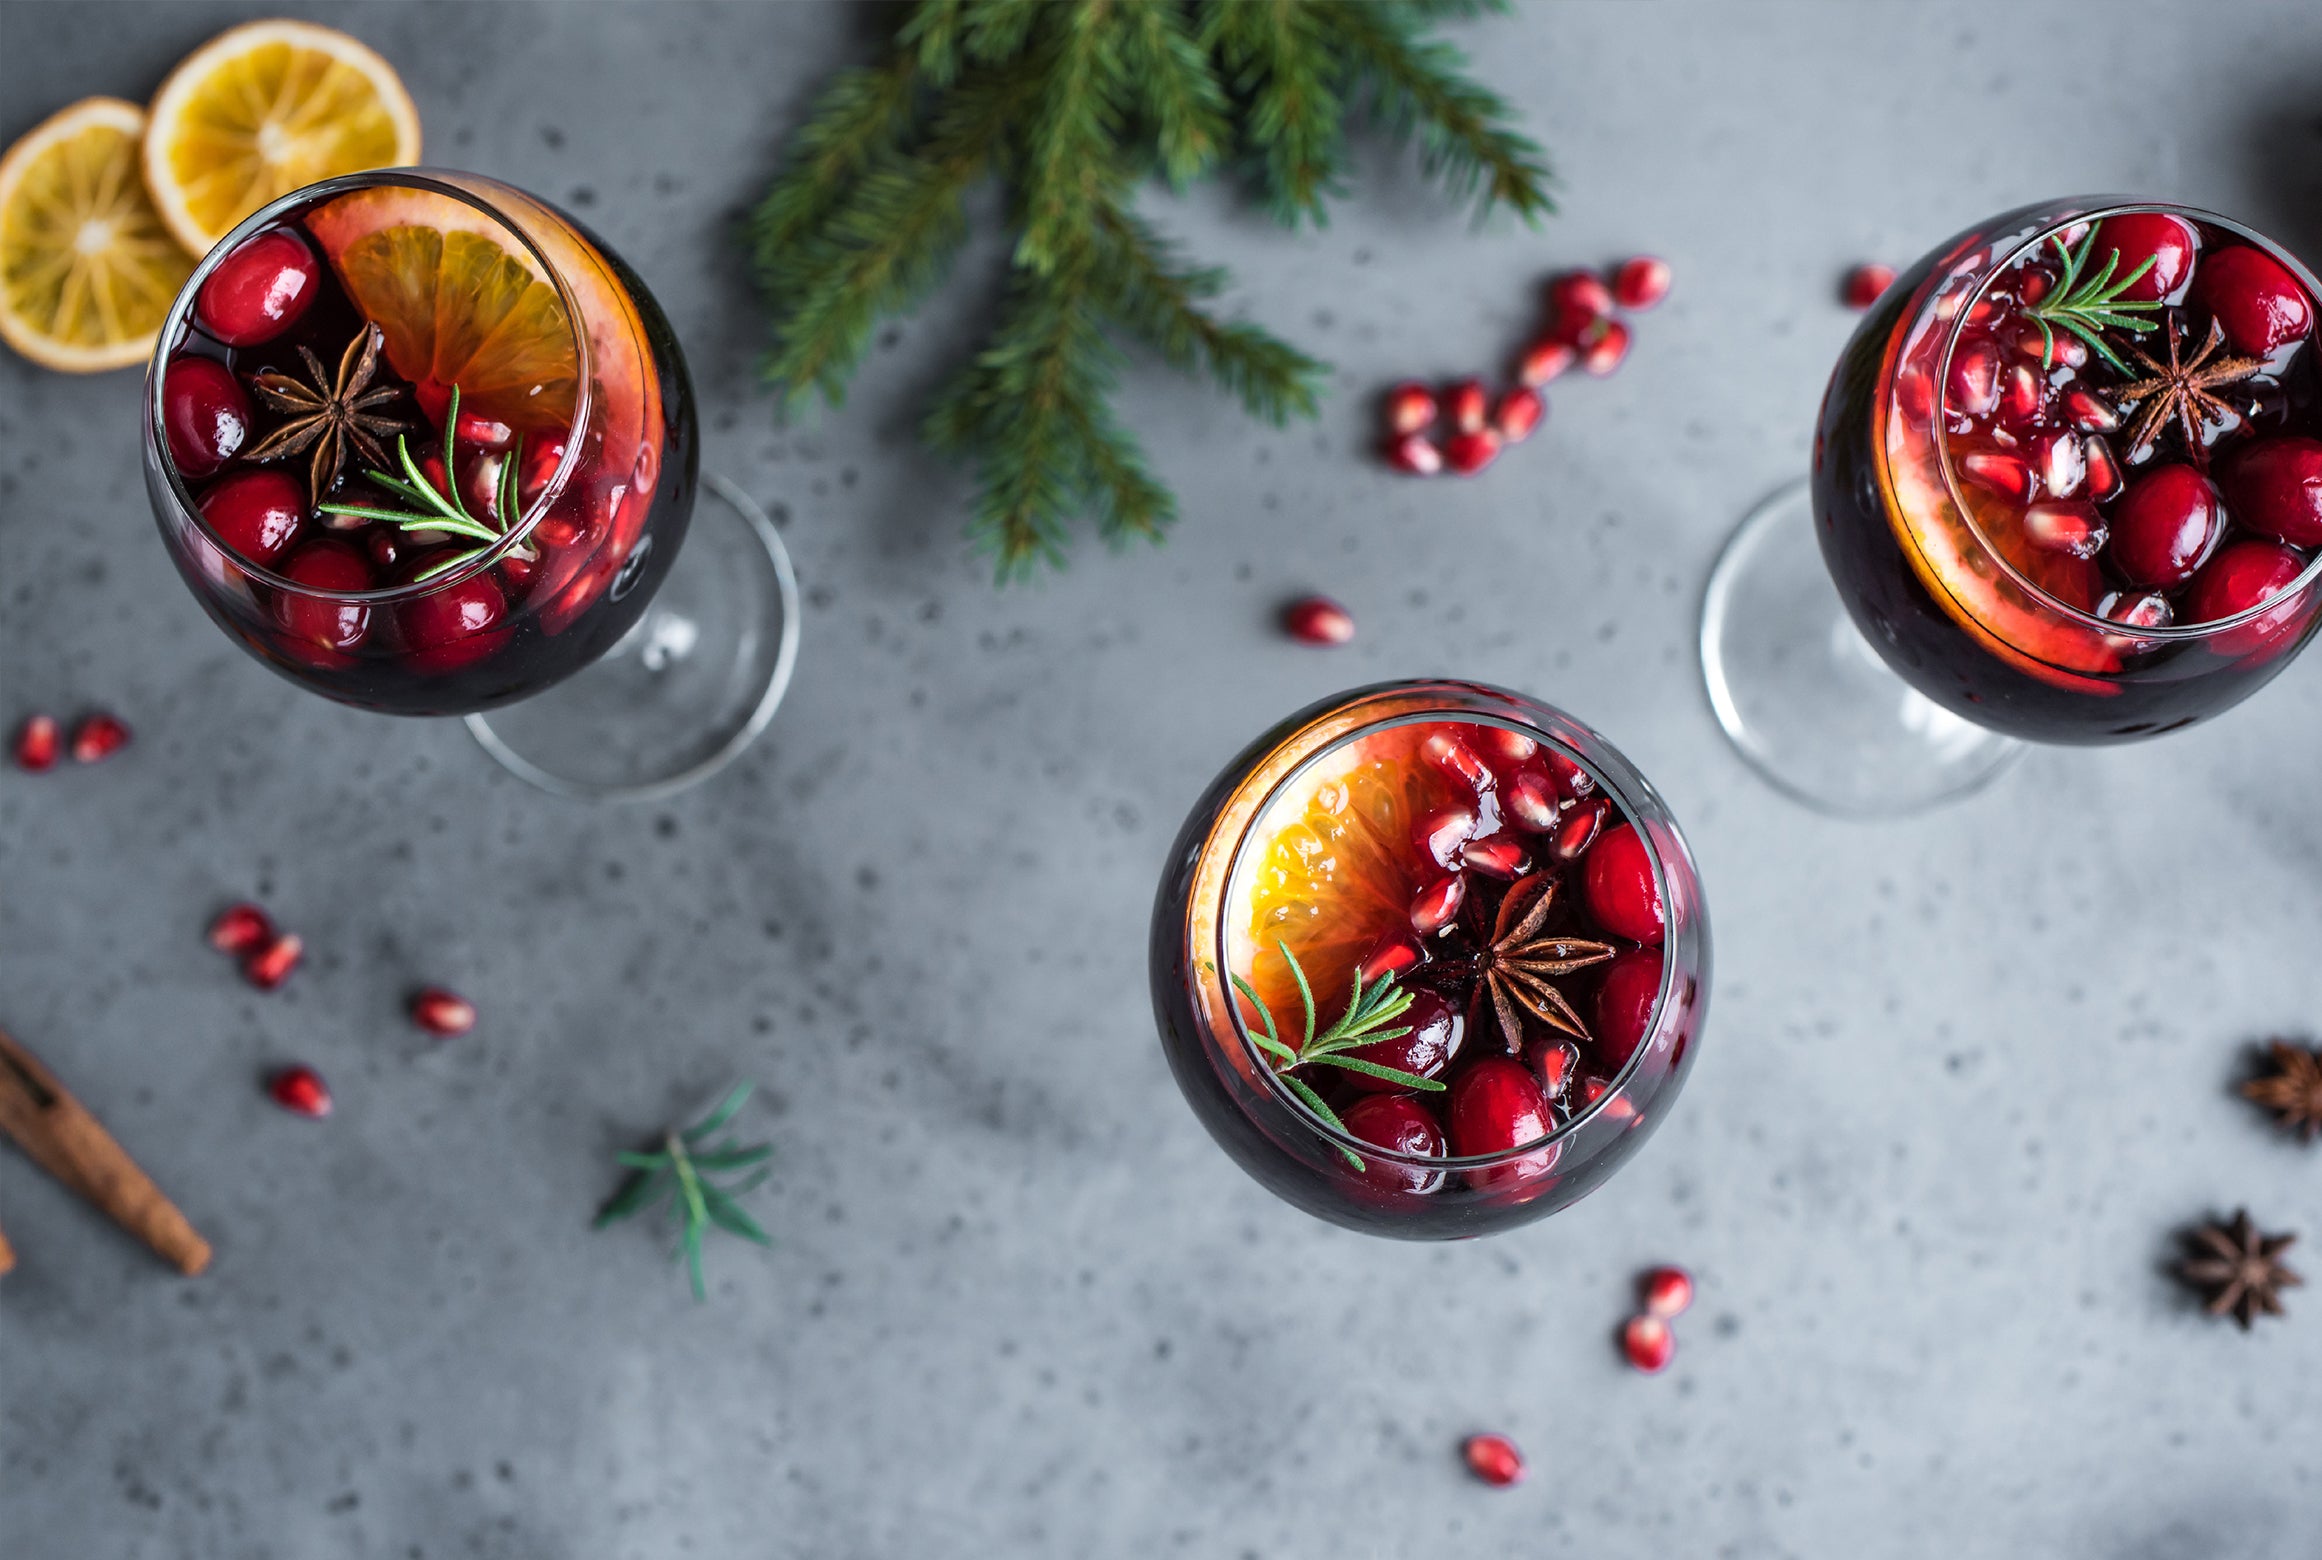 7 Holiday Cocktails to Make Your Spirits Bright